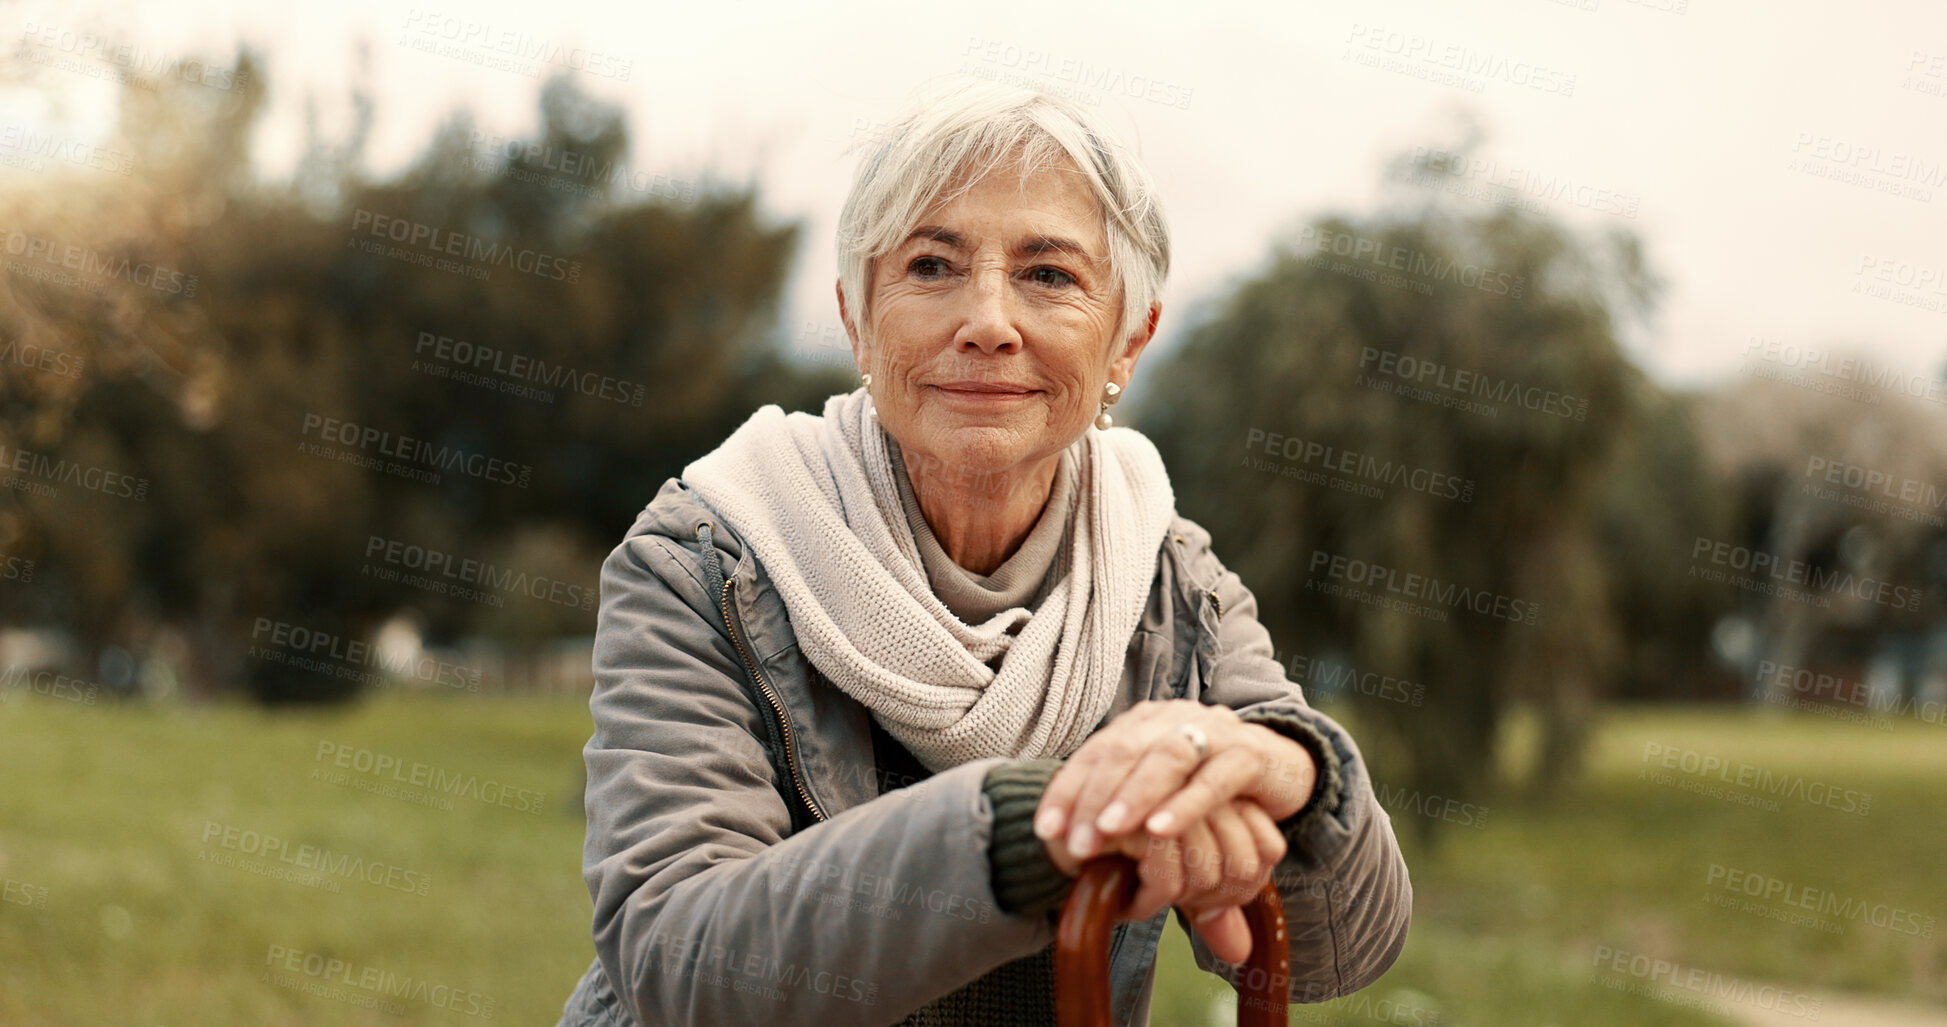 Buy stock photo Nature, cane and senior woman in a park walking for fresh air, exercise or wellness with peace. Calm, smile and elderly female person in retirement with a stick for support at an outdoor garden.